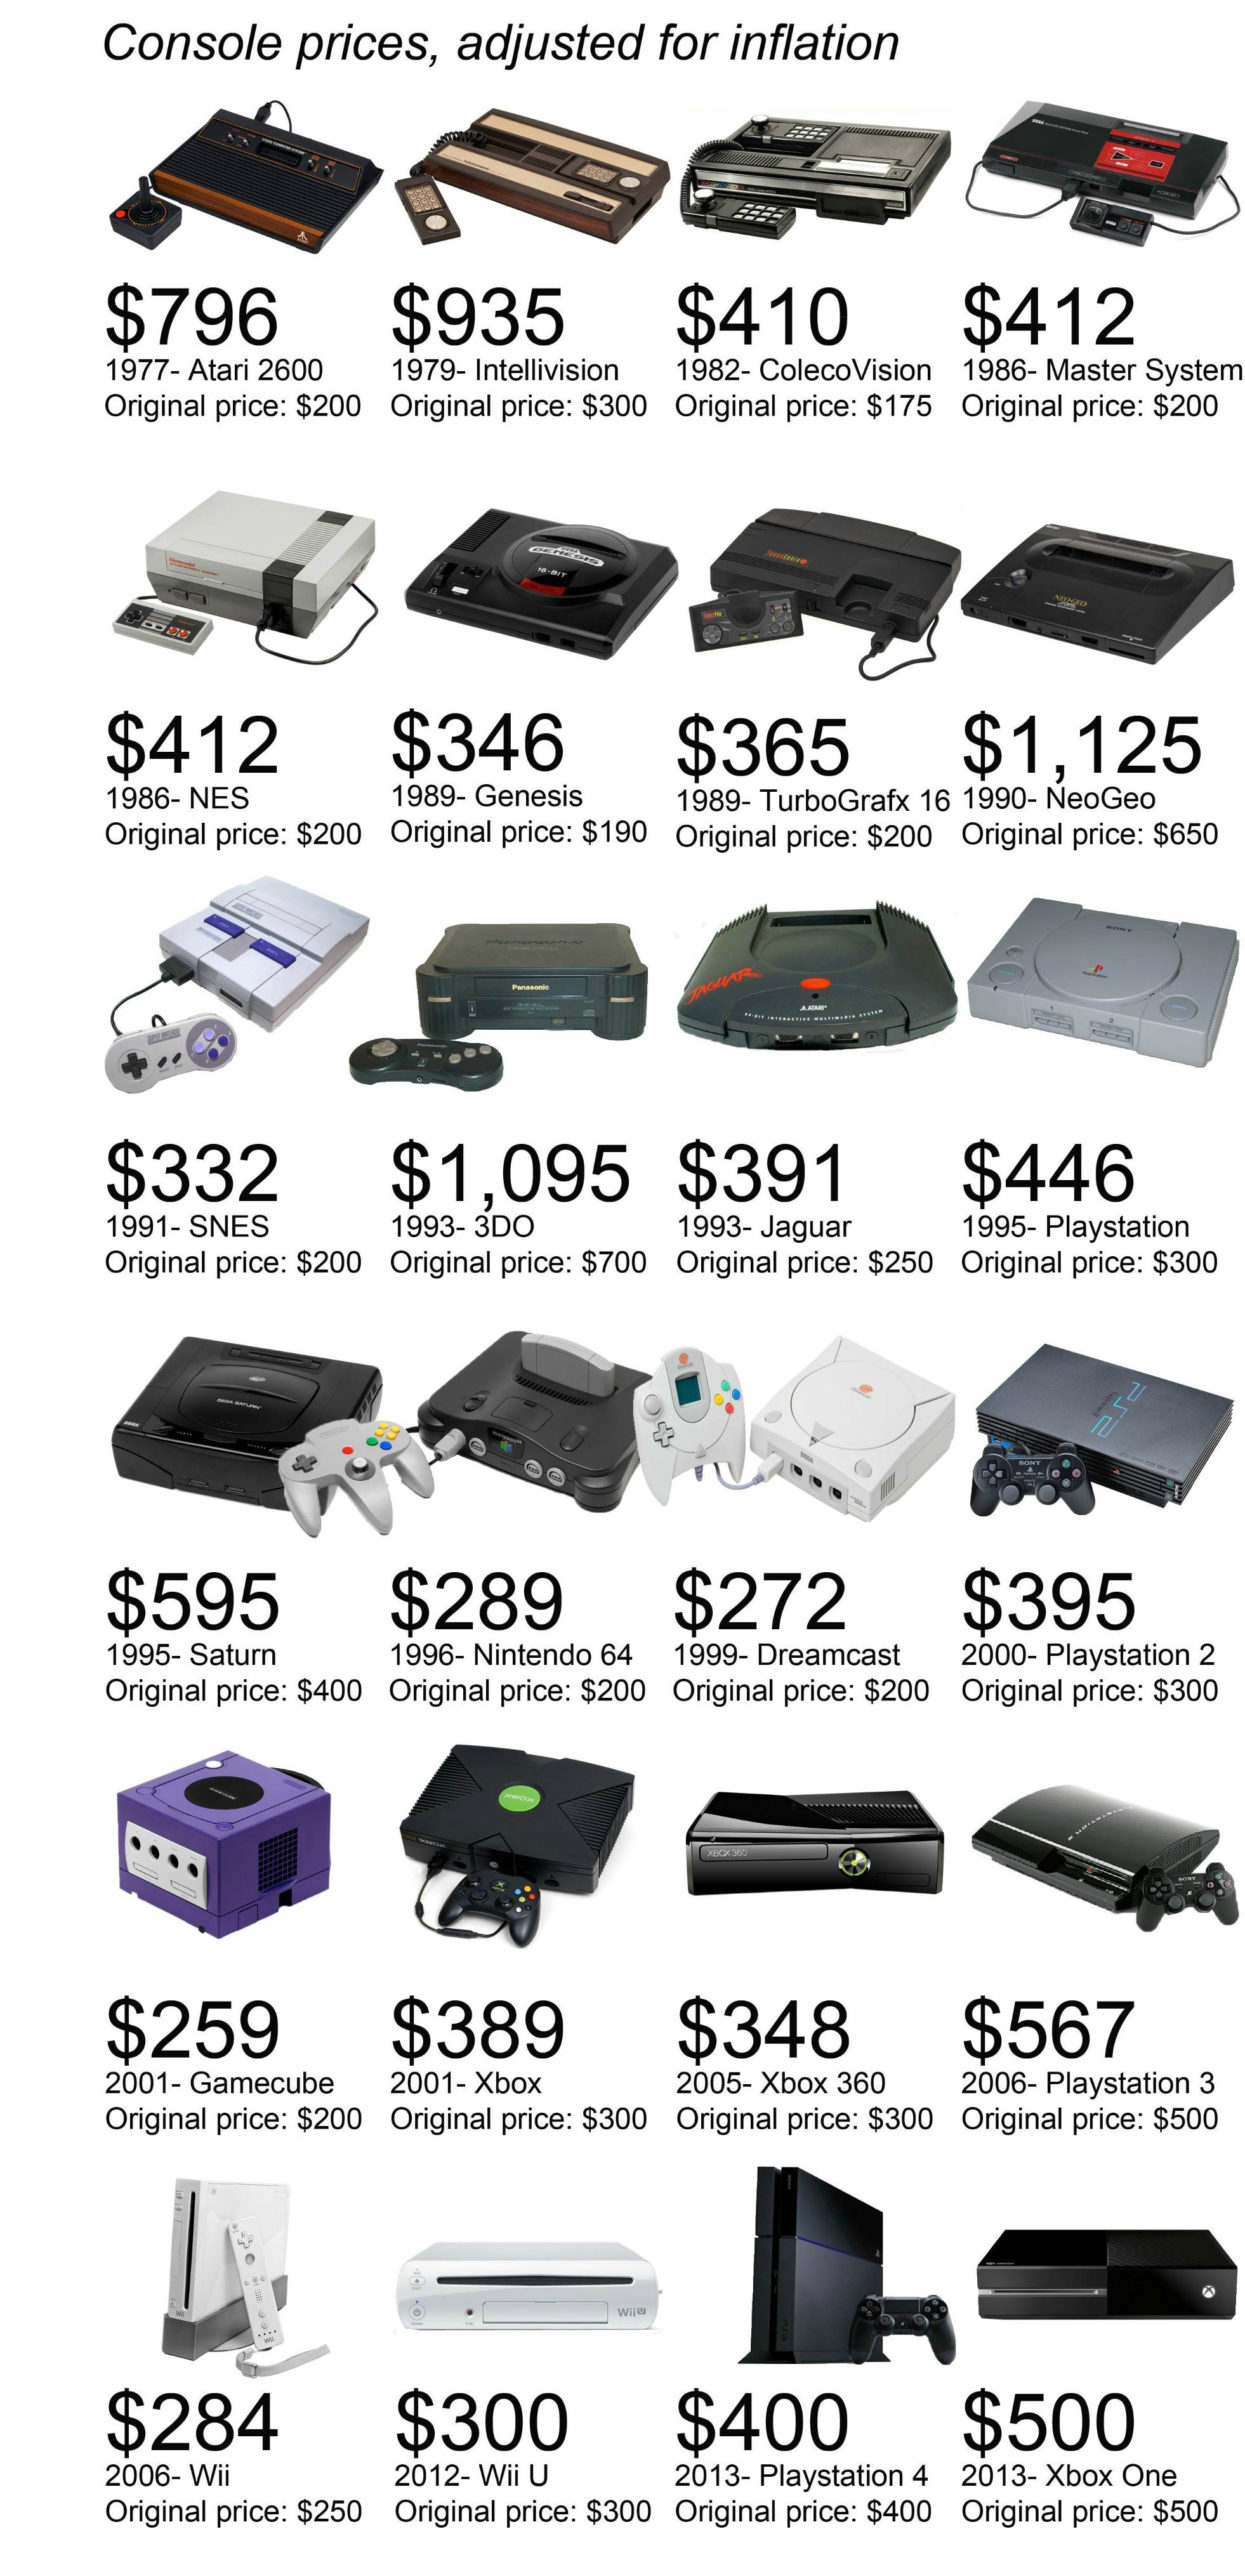 36 Years Of Console Prices, Adjusted For Inflation